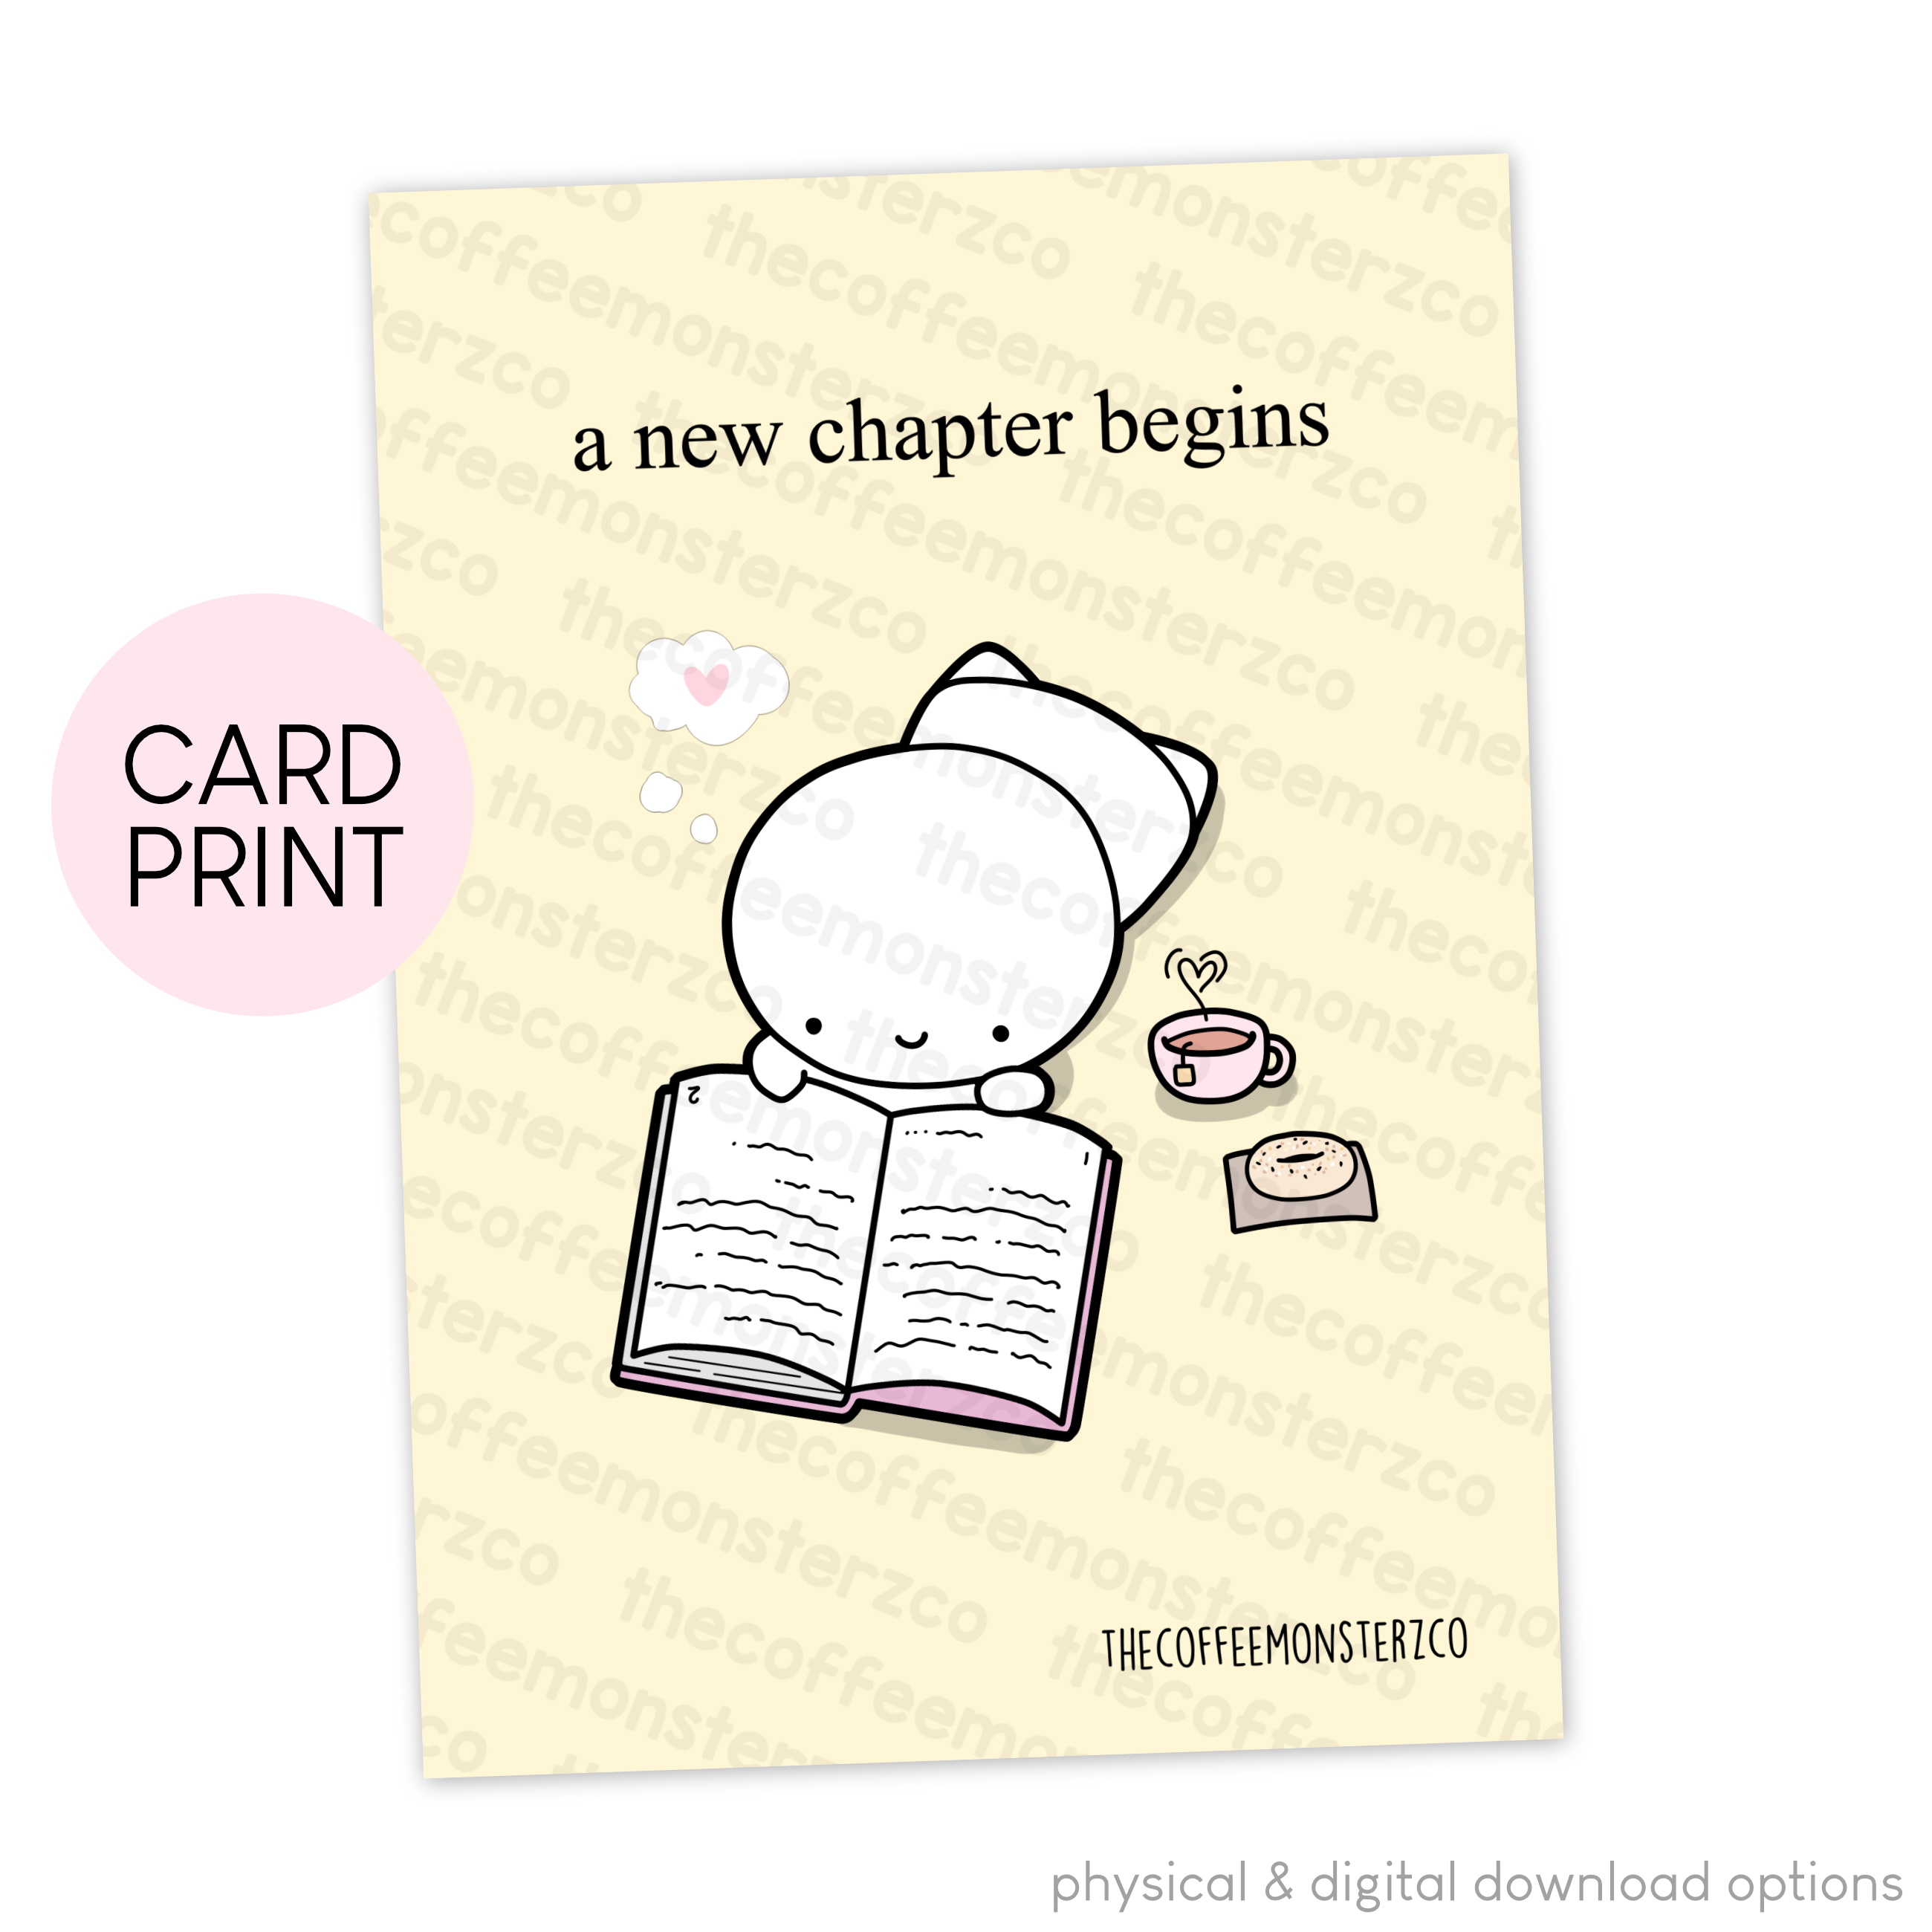 A New Chapter - Card Print